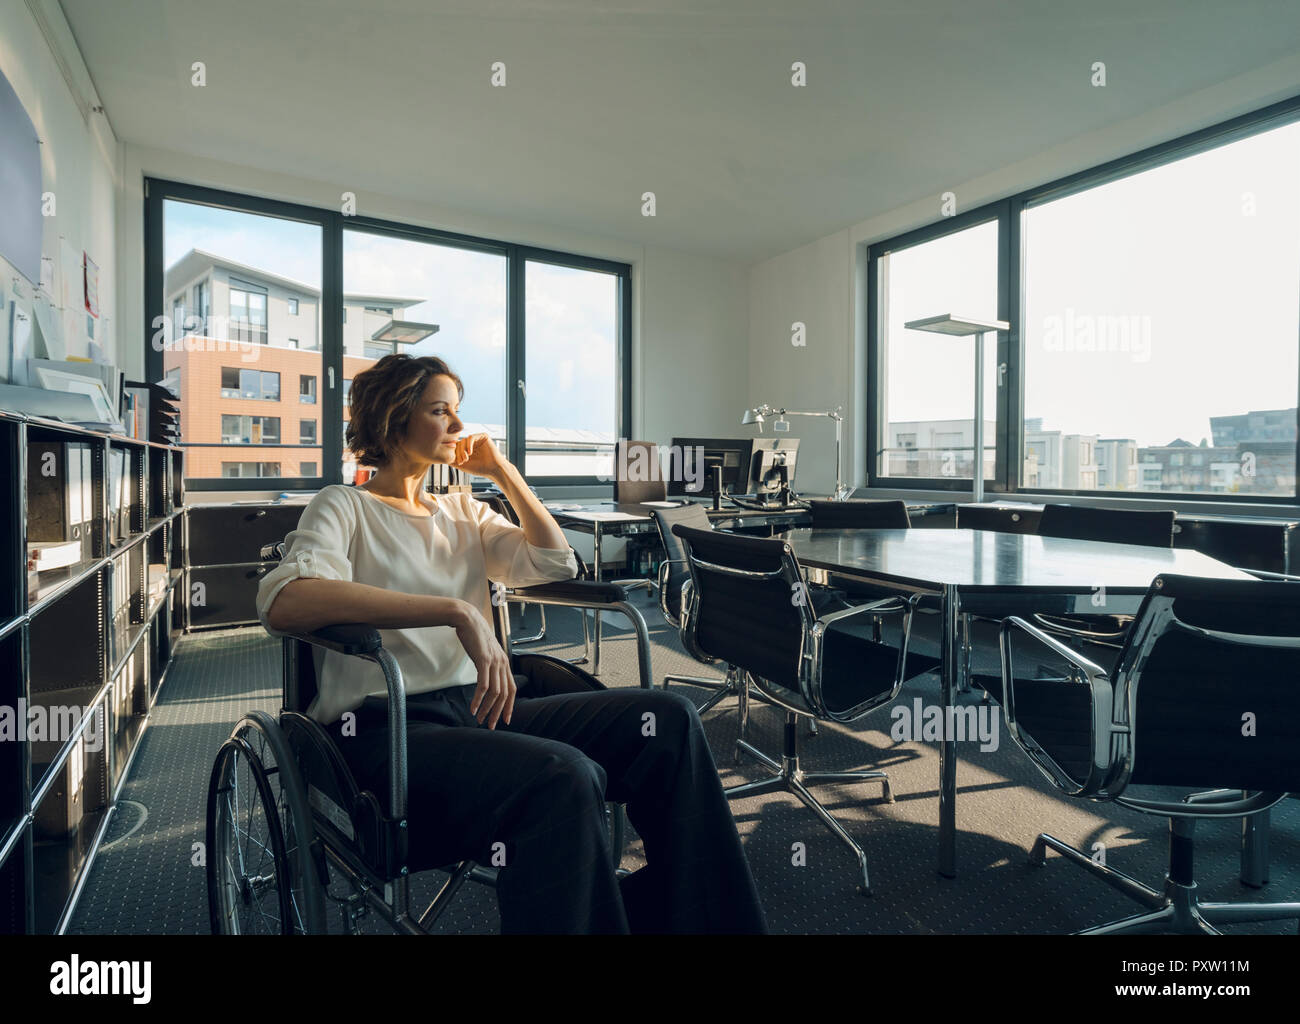 Disabled business woman sitting in wheelchair, smiling Stock Photo